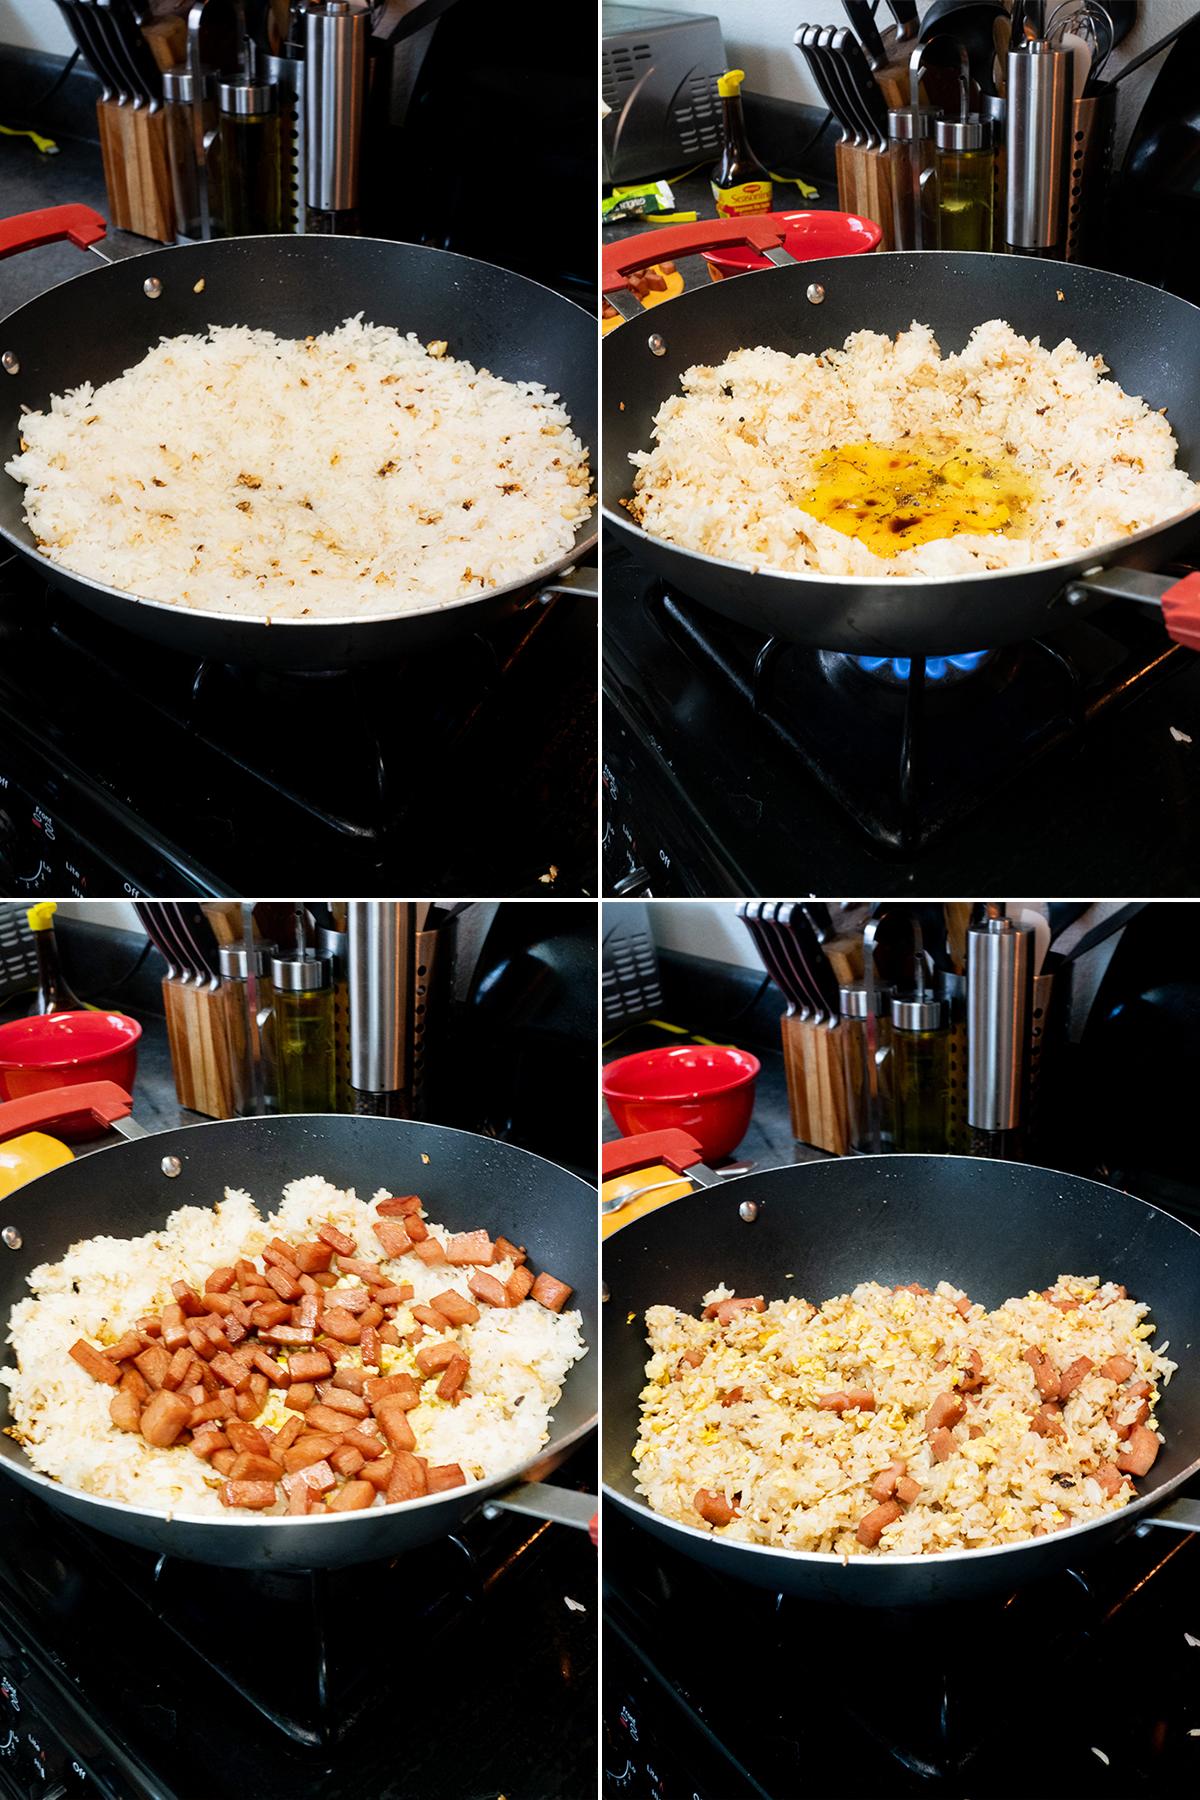 Collage of cooking steps for Spam Fried Rice. 1) Crisp the rice. 2) Add eggs to the center of the pan. 3) Add the crisped Spam back in. 4) Stir to mix.